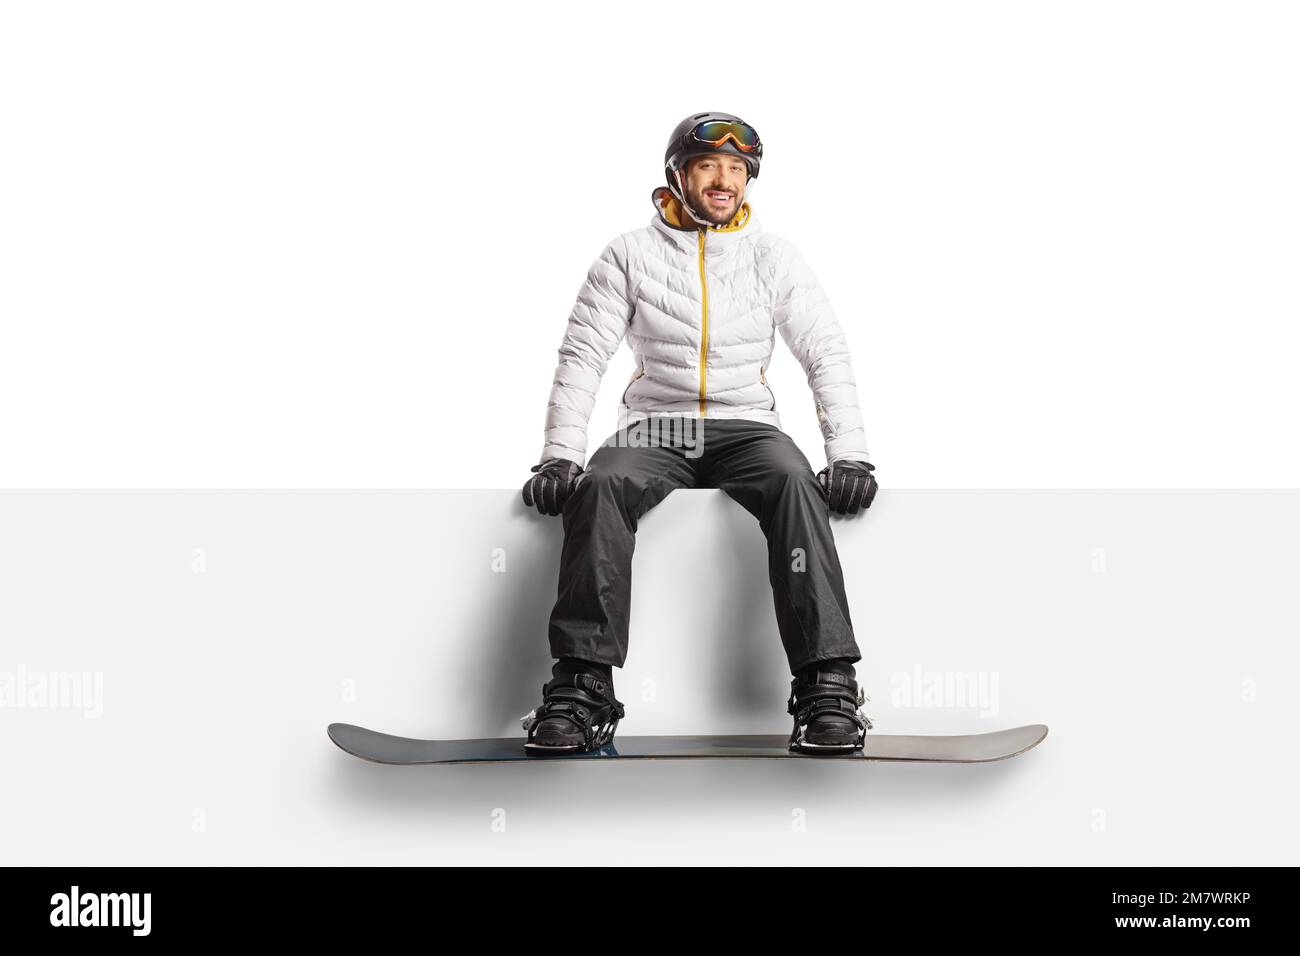 Man wearing a snowboard and sitting on a blank panel isolated on white background Stock Photo